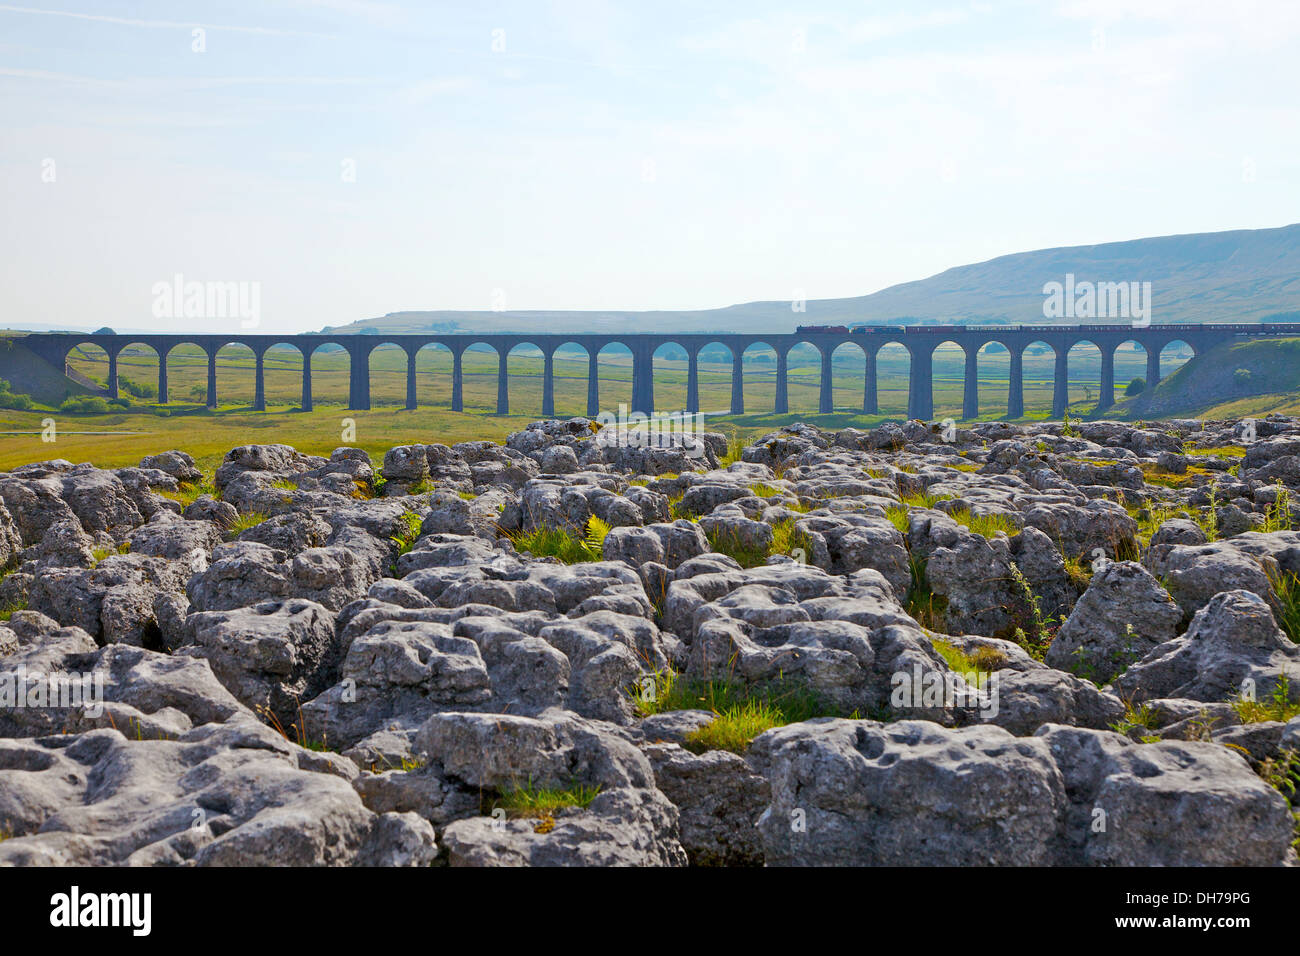 Steam train crossing Ribblehead Viaduct with limestone pavement in forground. Yorkshire Dales National Park North Yorkshire UK Stock Photo